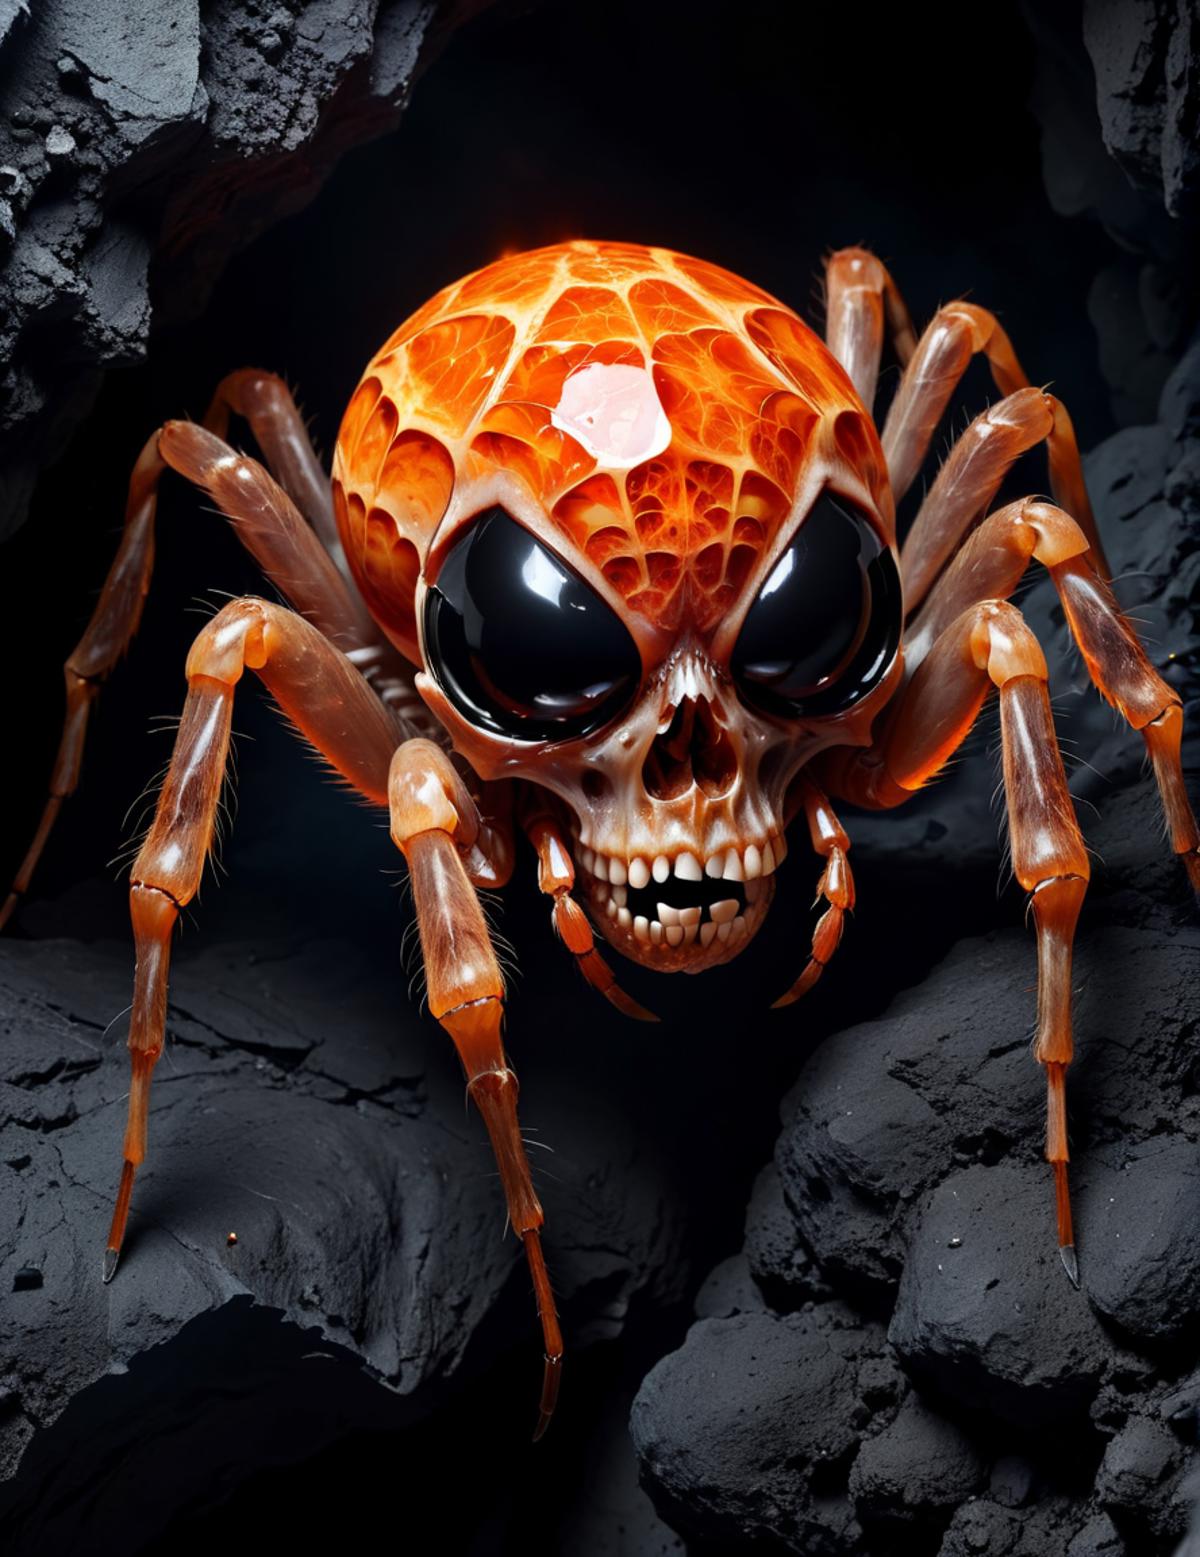 An orange spider with a skull face sitting on a rock.